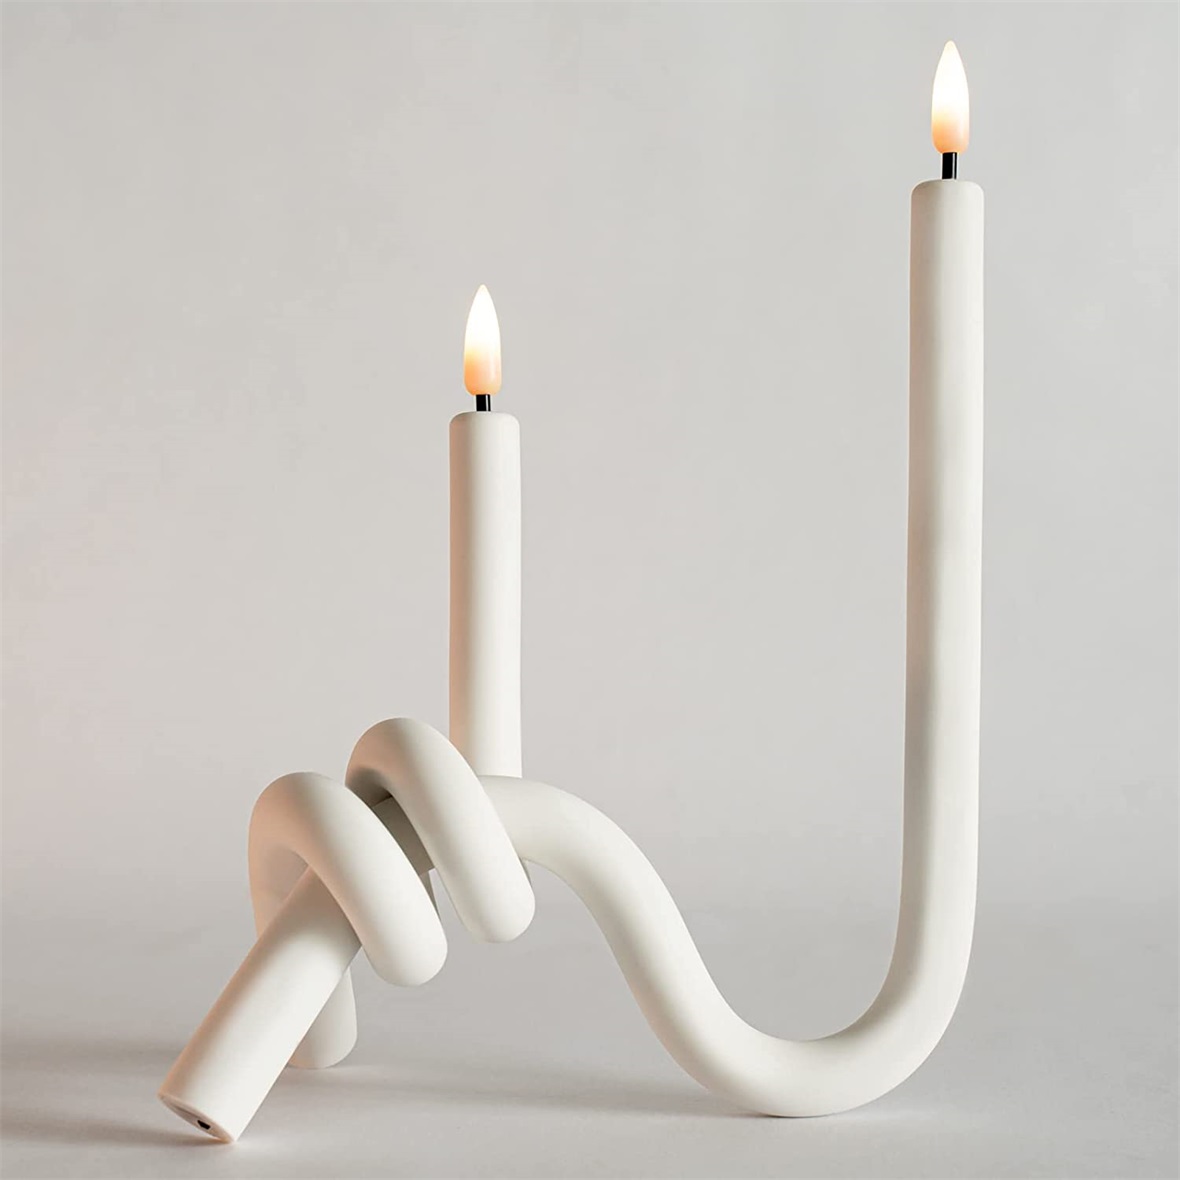 Yongmao Flameless Taper Candles Twisted Rechargeable LED Electric Fake Flickering Candles for Home Wedding Party Christmas Decoration (2Pcs, White)